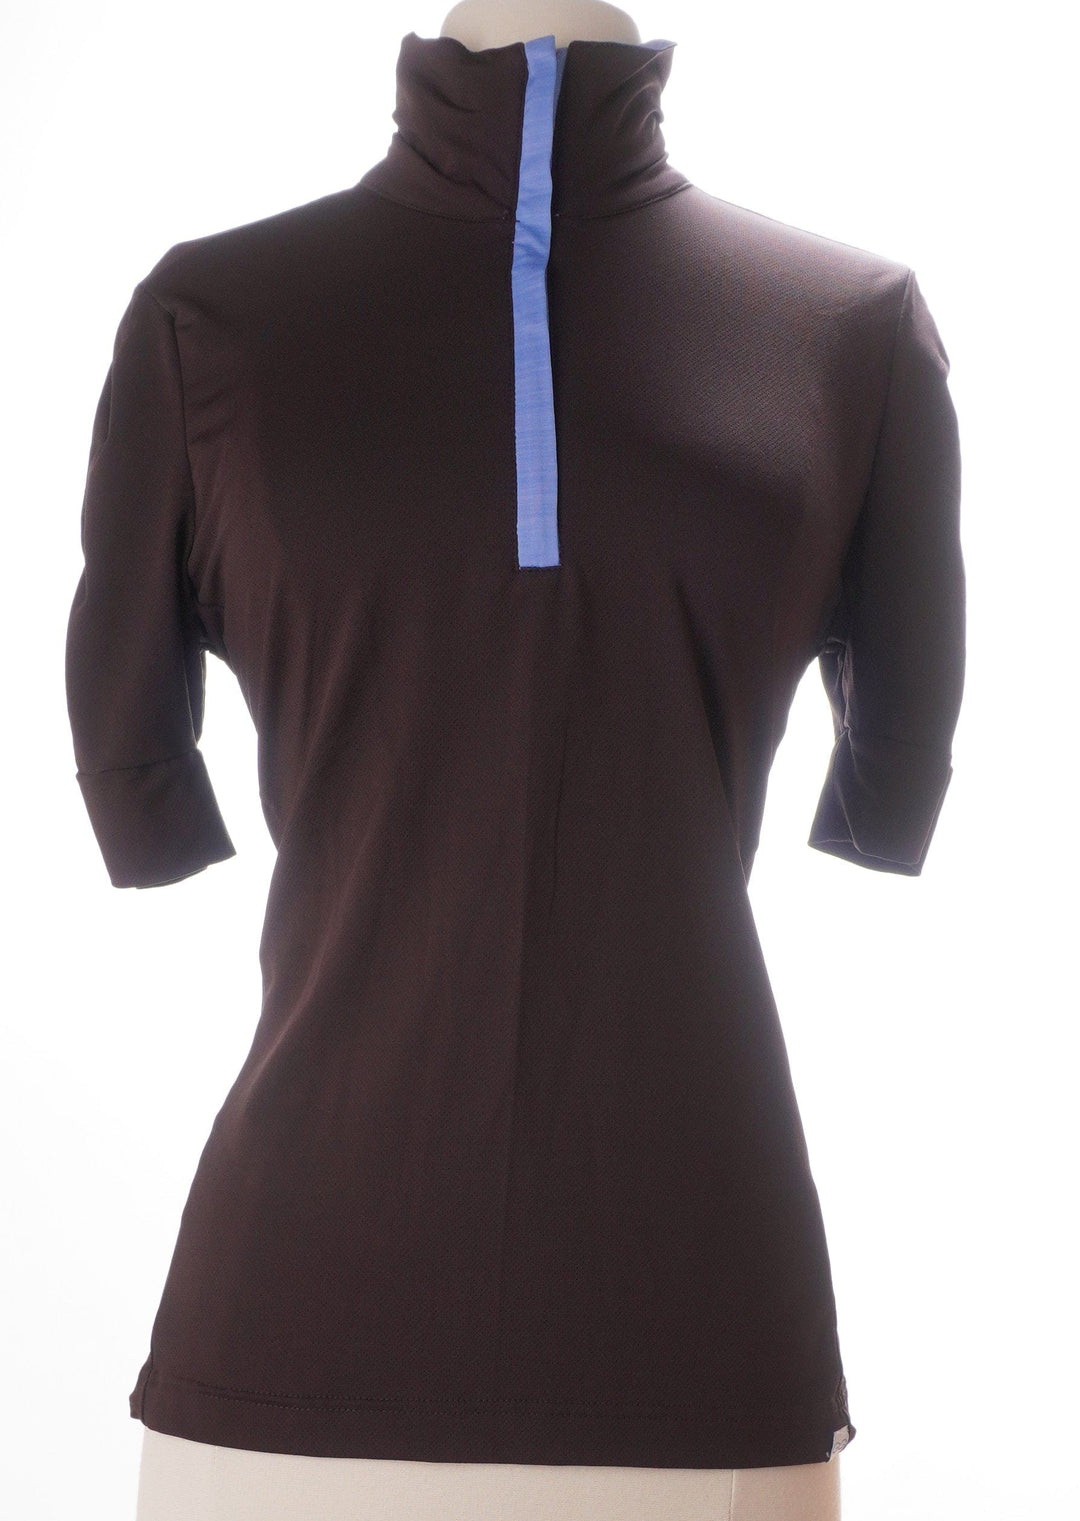 GGblue Brown / Small / Consigned GGBlue Short Sleeve Top - Brown - Size Small